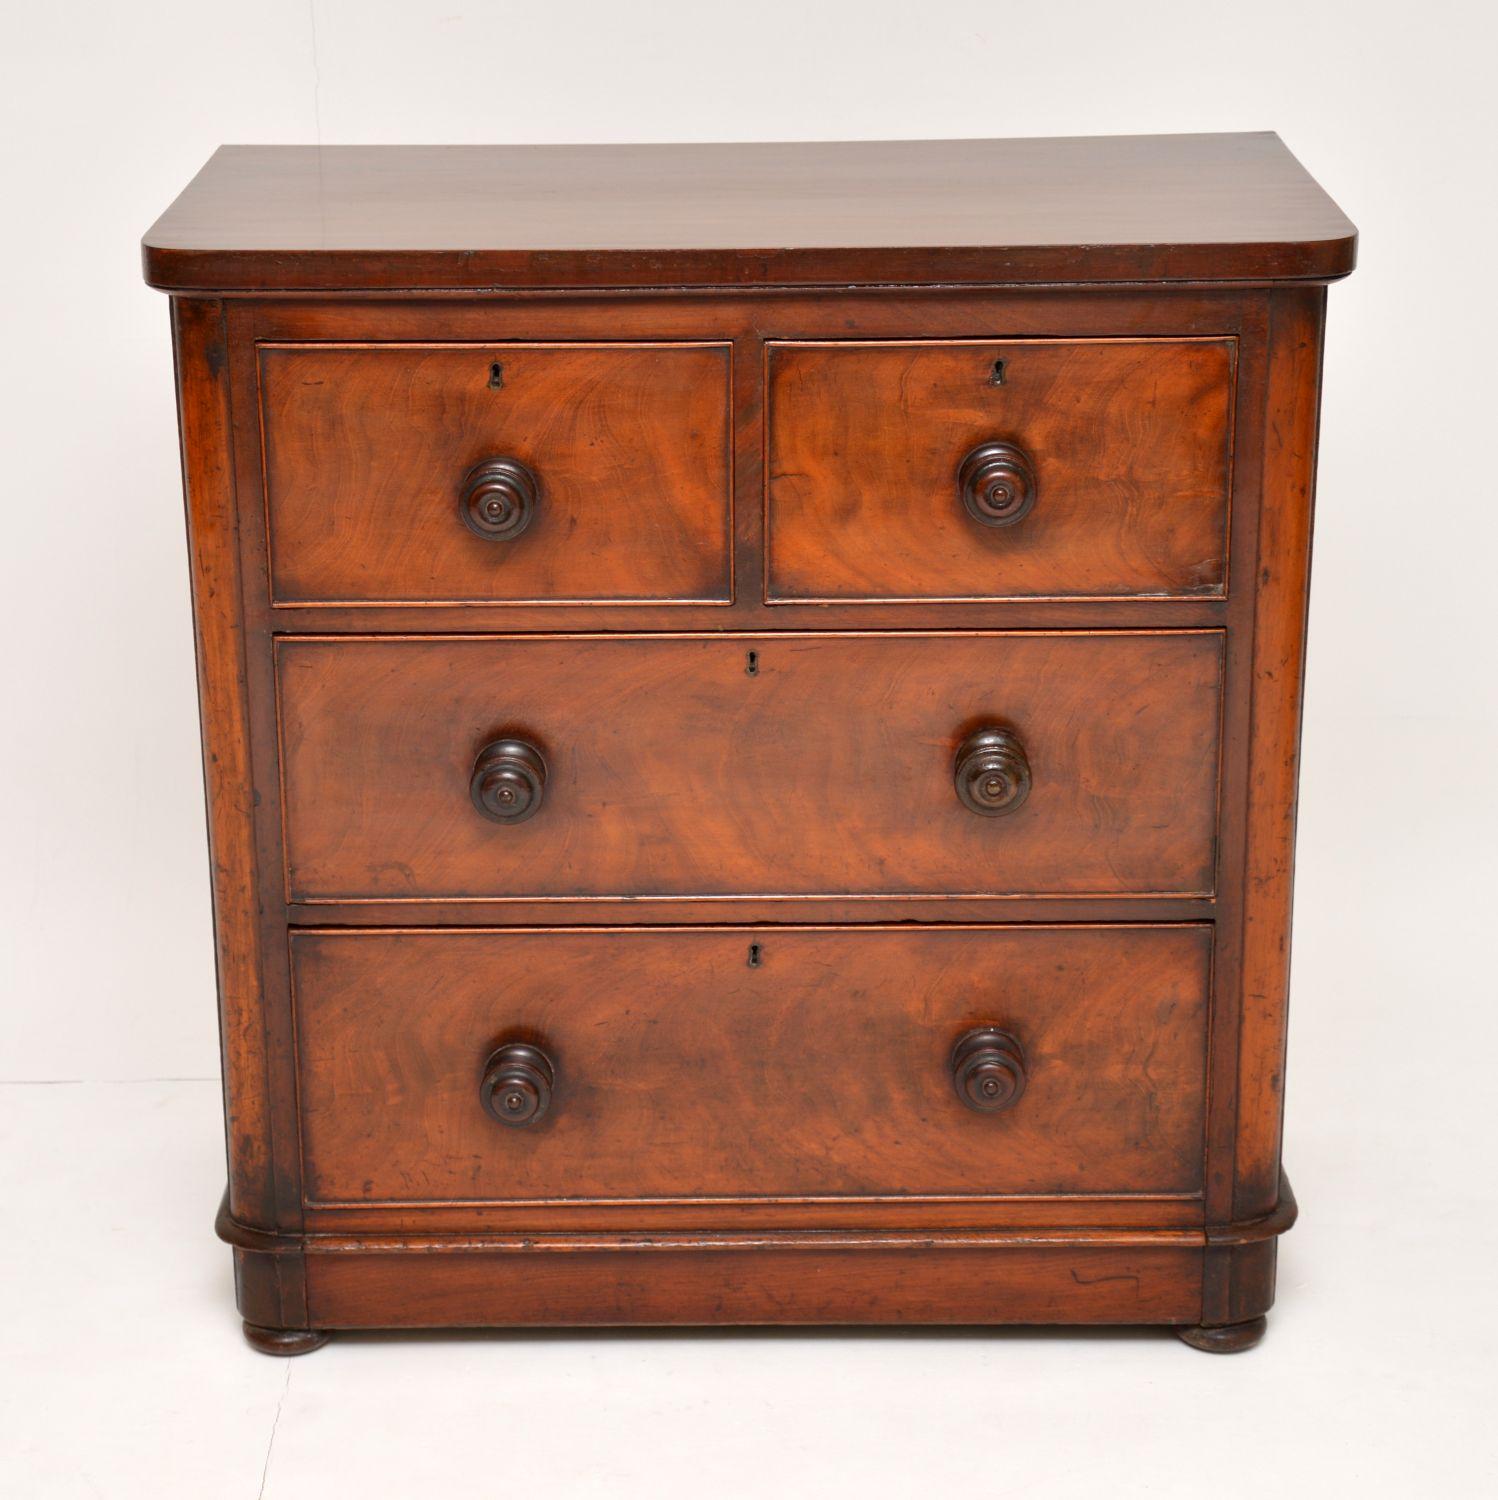 Small antique Victorian mahogany chest of drawers in good condition and with lots of character. It has rounded corners and deep drawers with turned mahogany handles, locks & Fine dovetails. One particular nice feature is the bottom drawer that’s